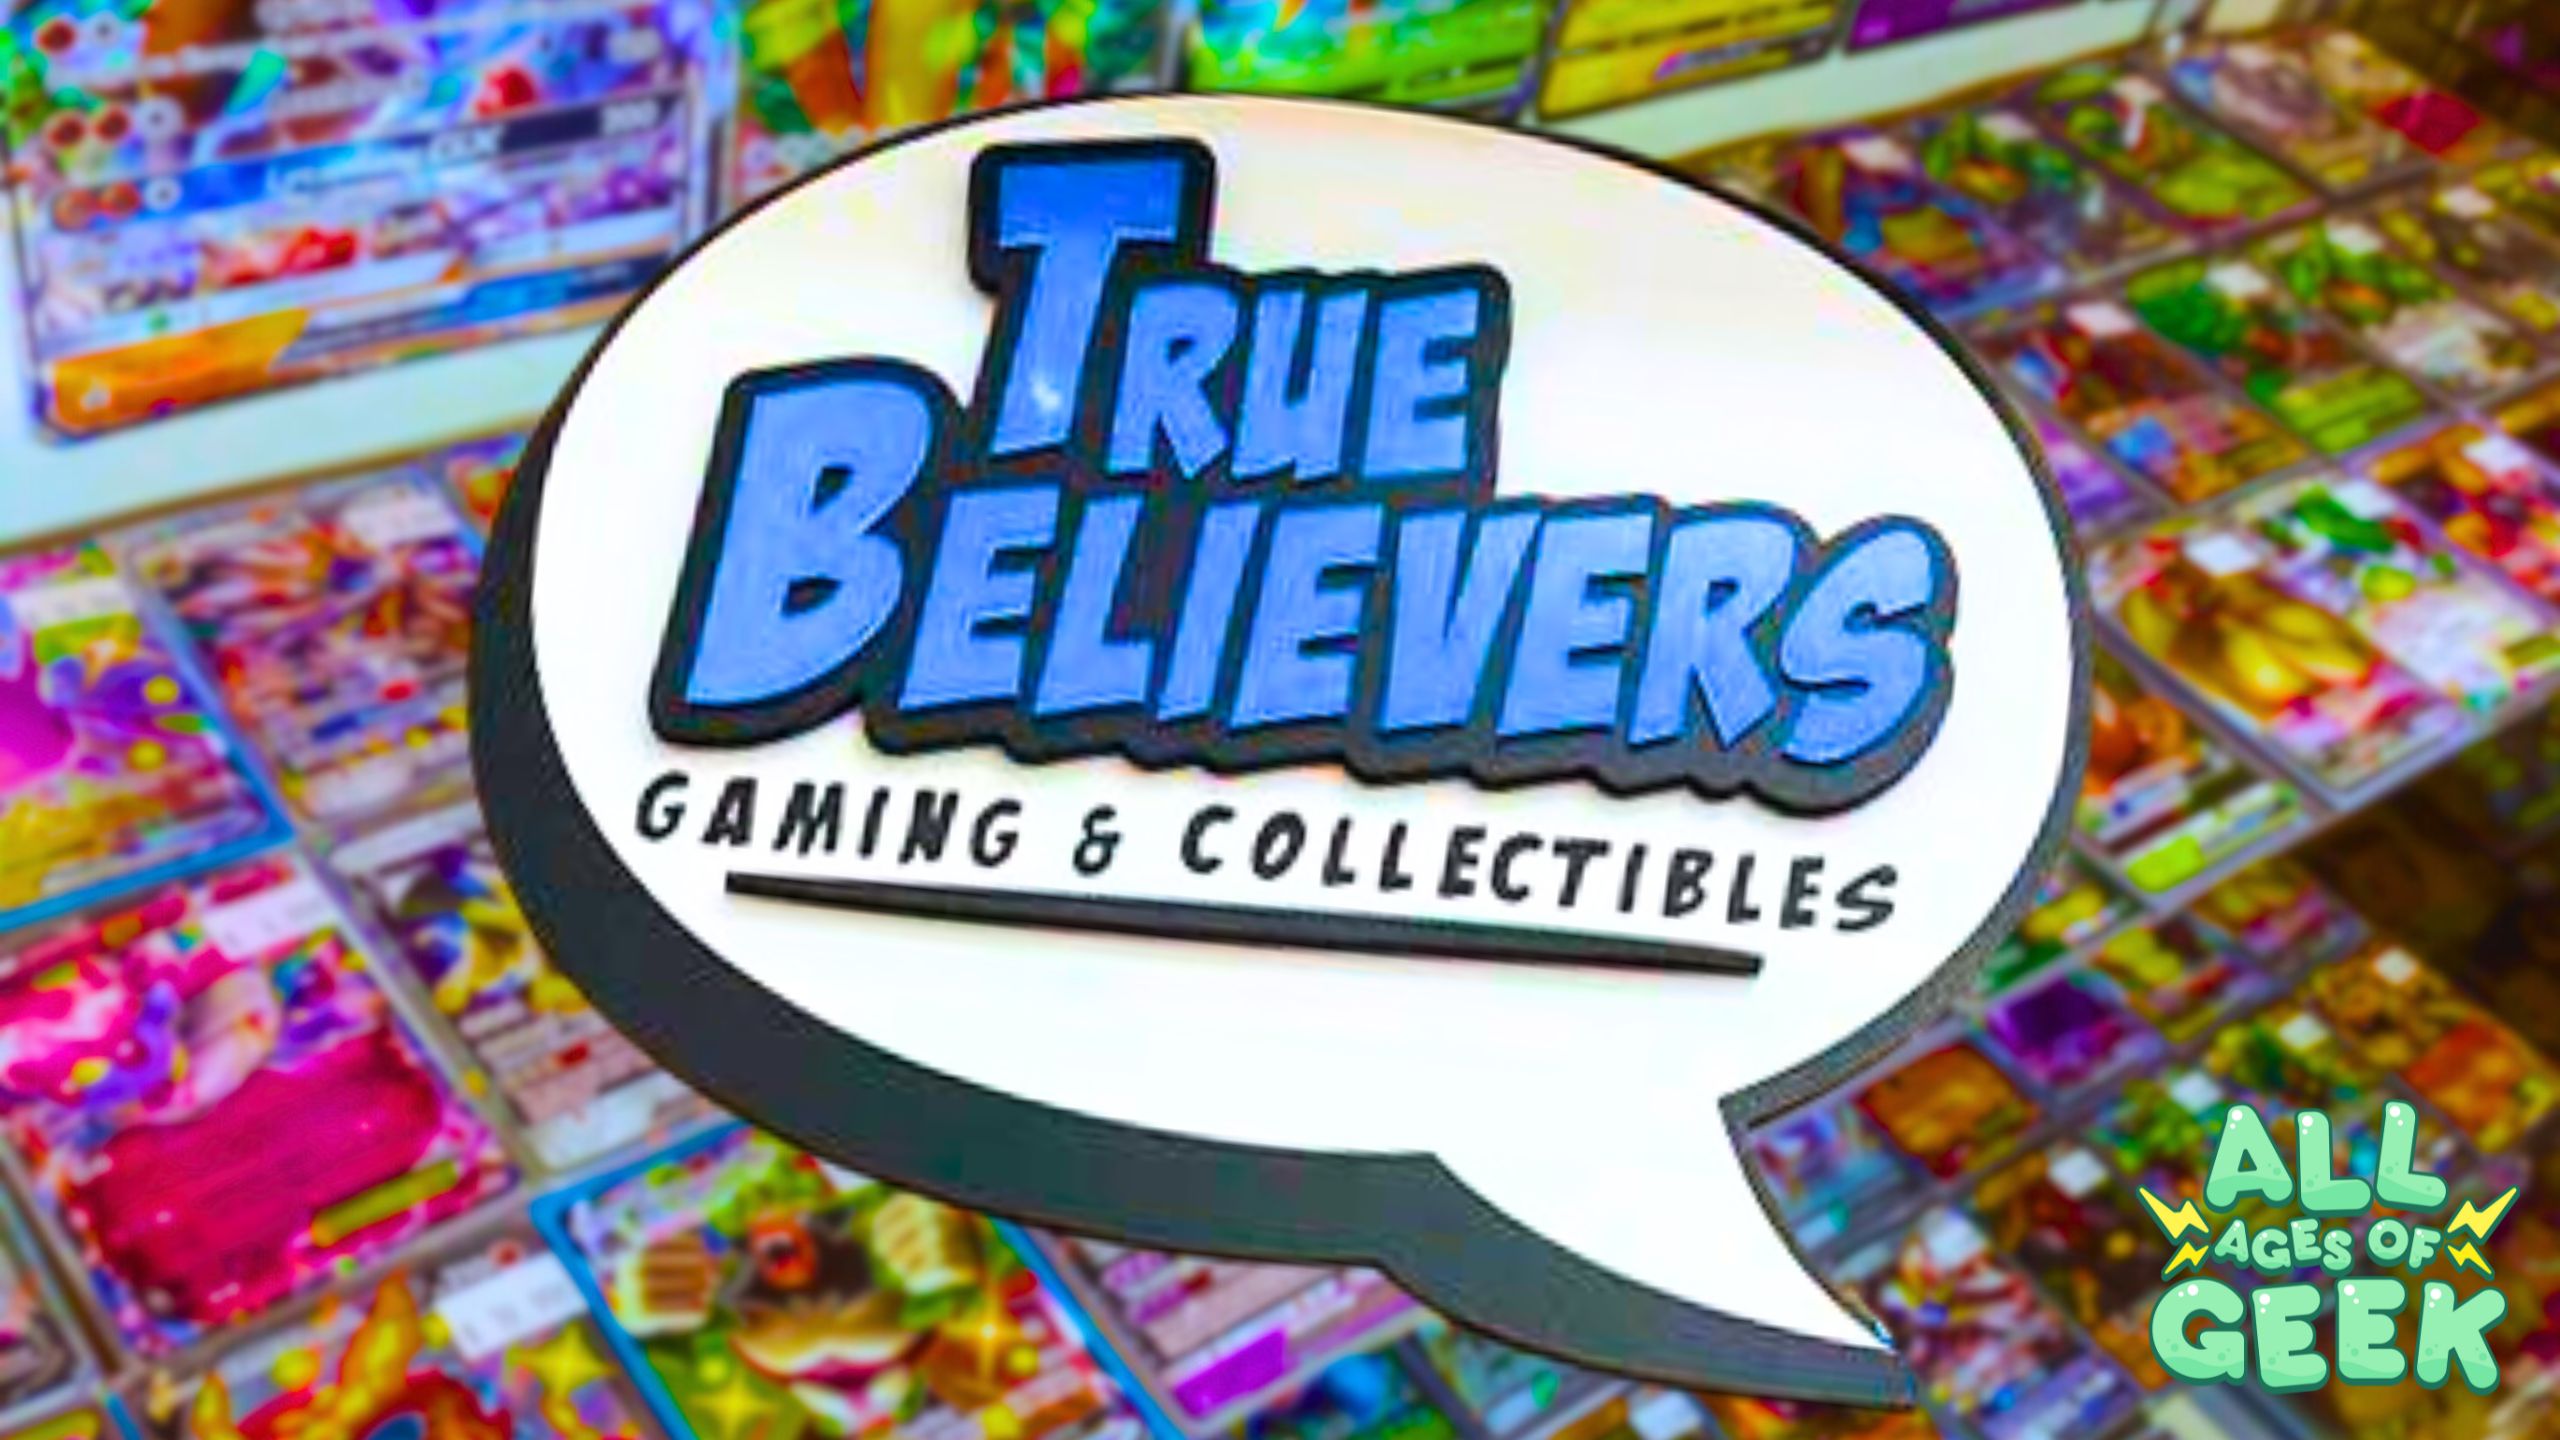 True Believers Gaming and Collectibles logo displayed over a colorful background of trading cards, with the All Ages of Geek logo in the bottom right corner.